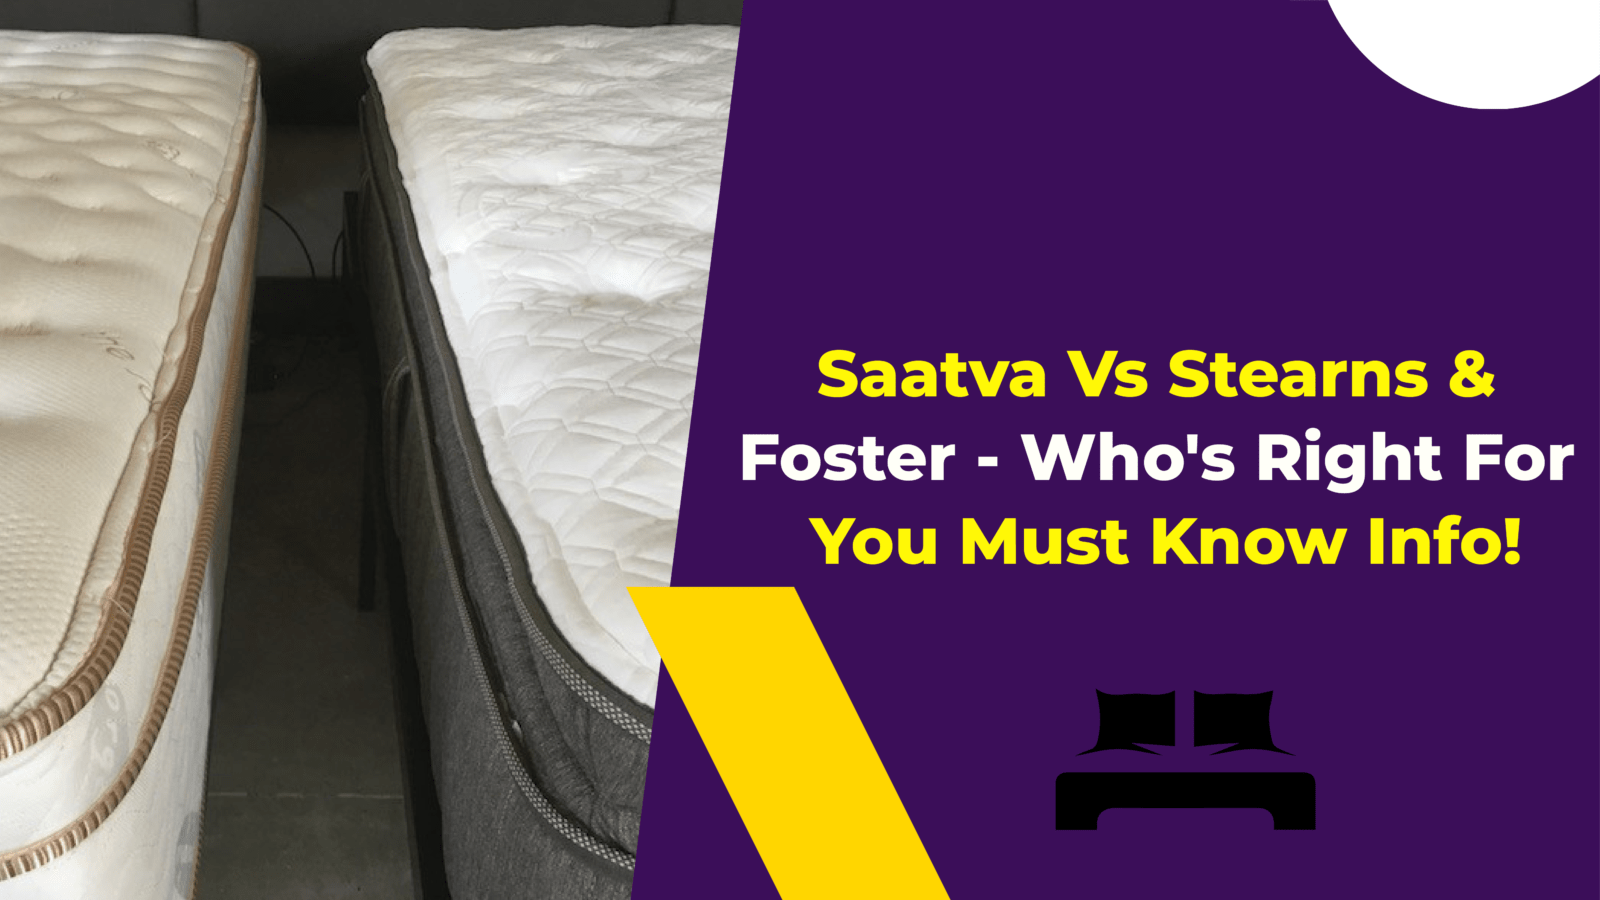 Saatva Vs Stearns & Foster - Who's Right For You Must Know Info!